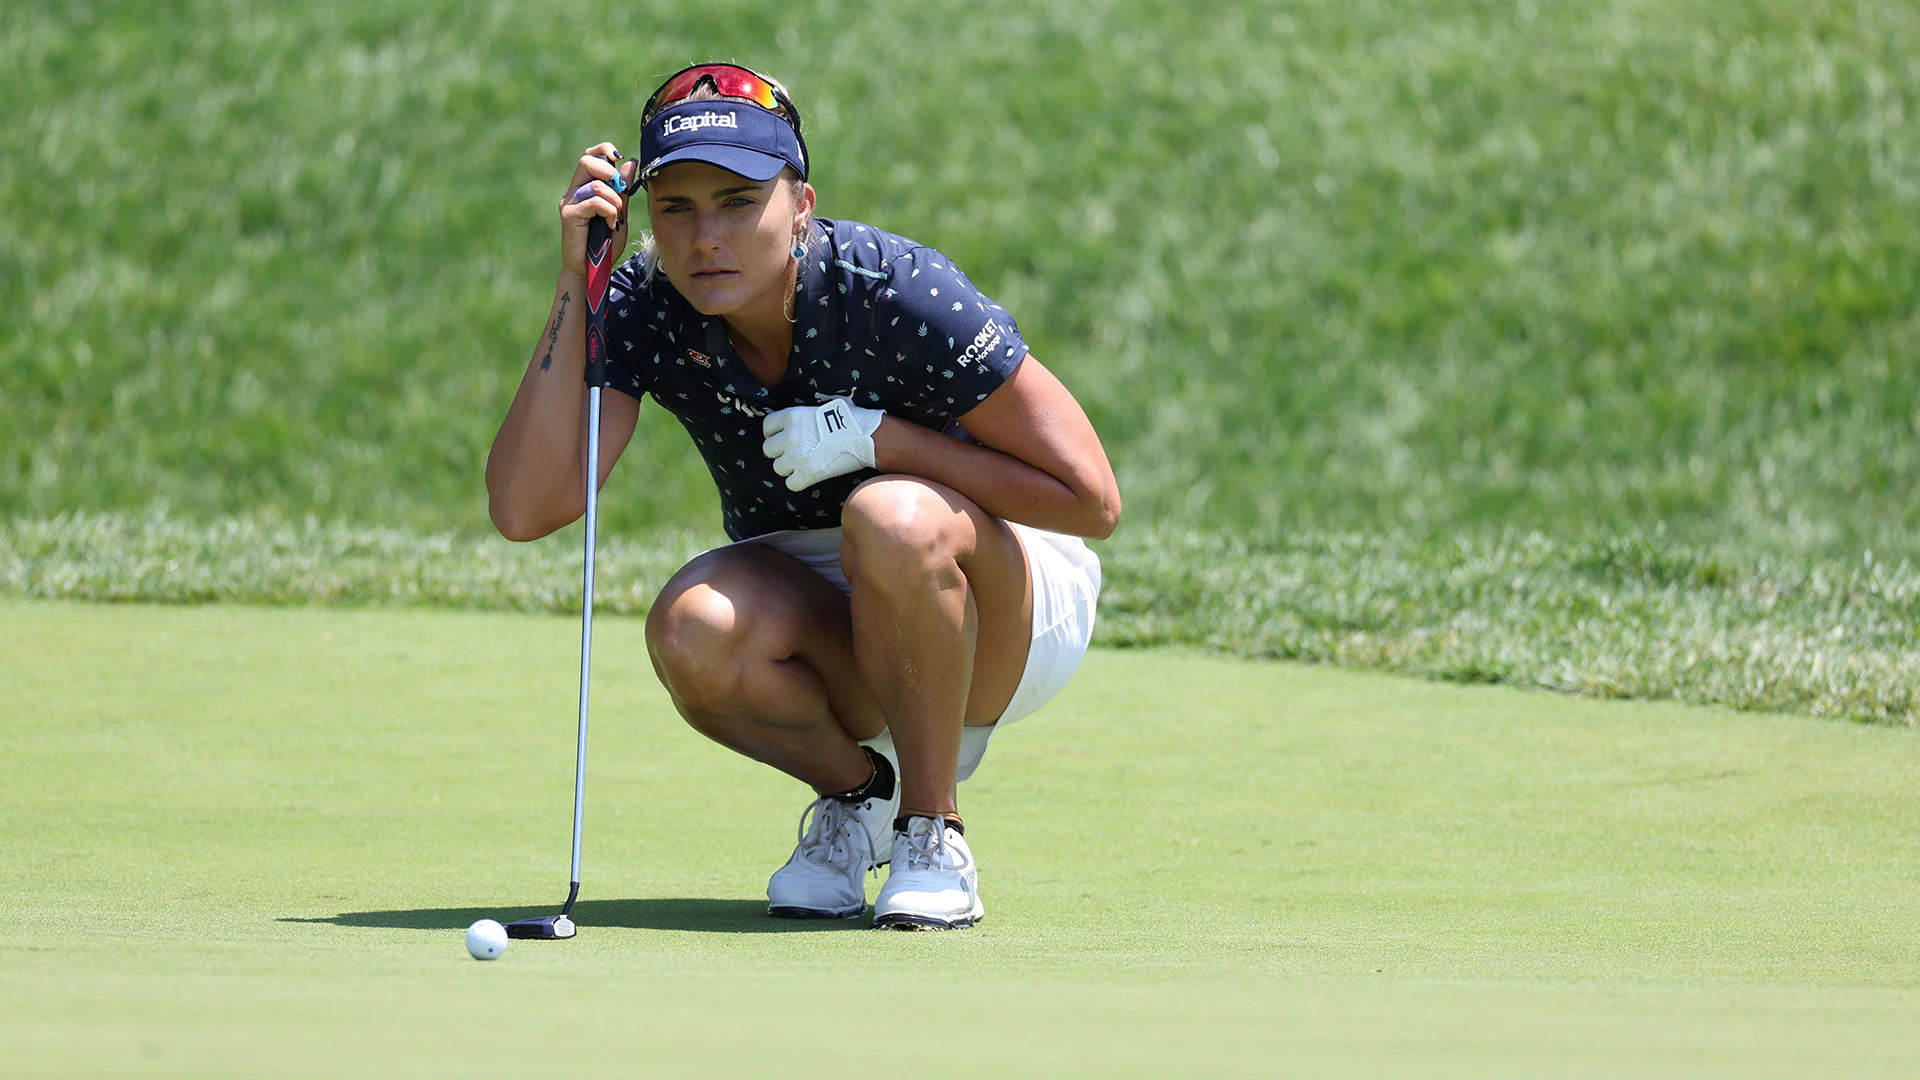 After heartbreaking KPMG runner-up, Lexi Thompson fined for slow play